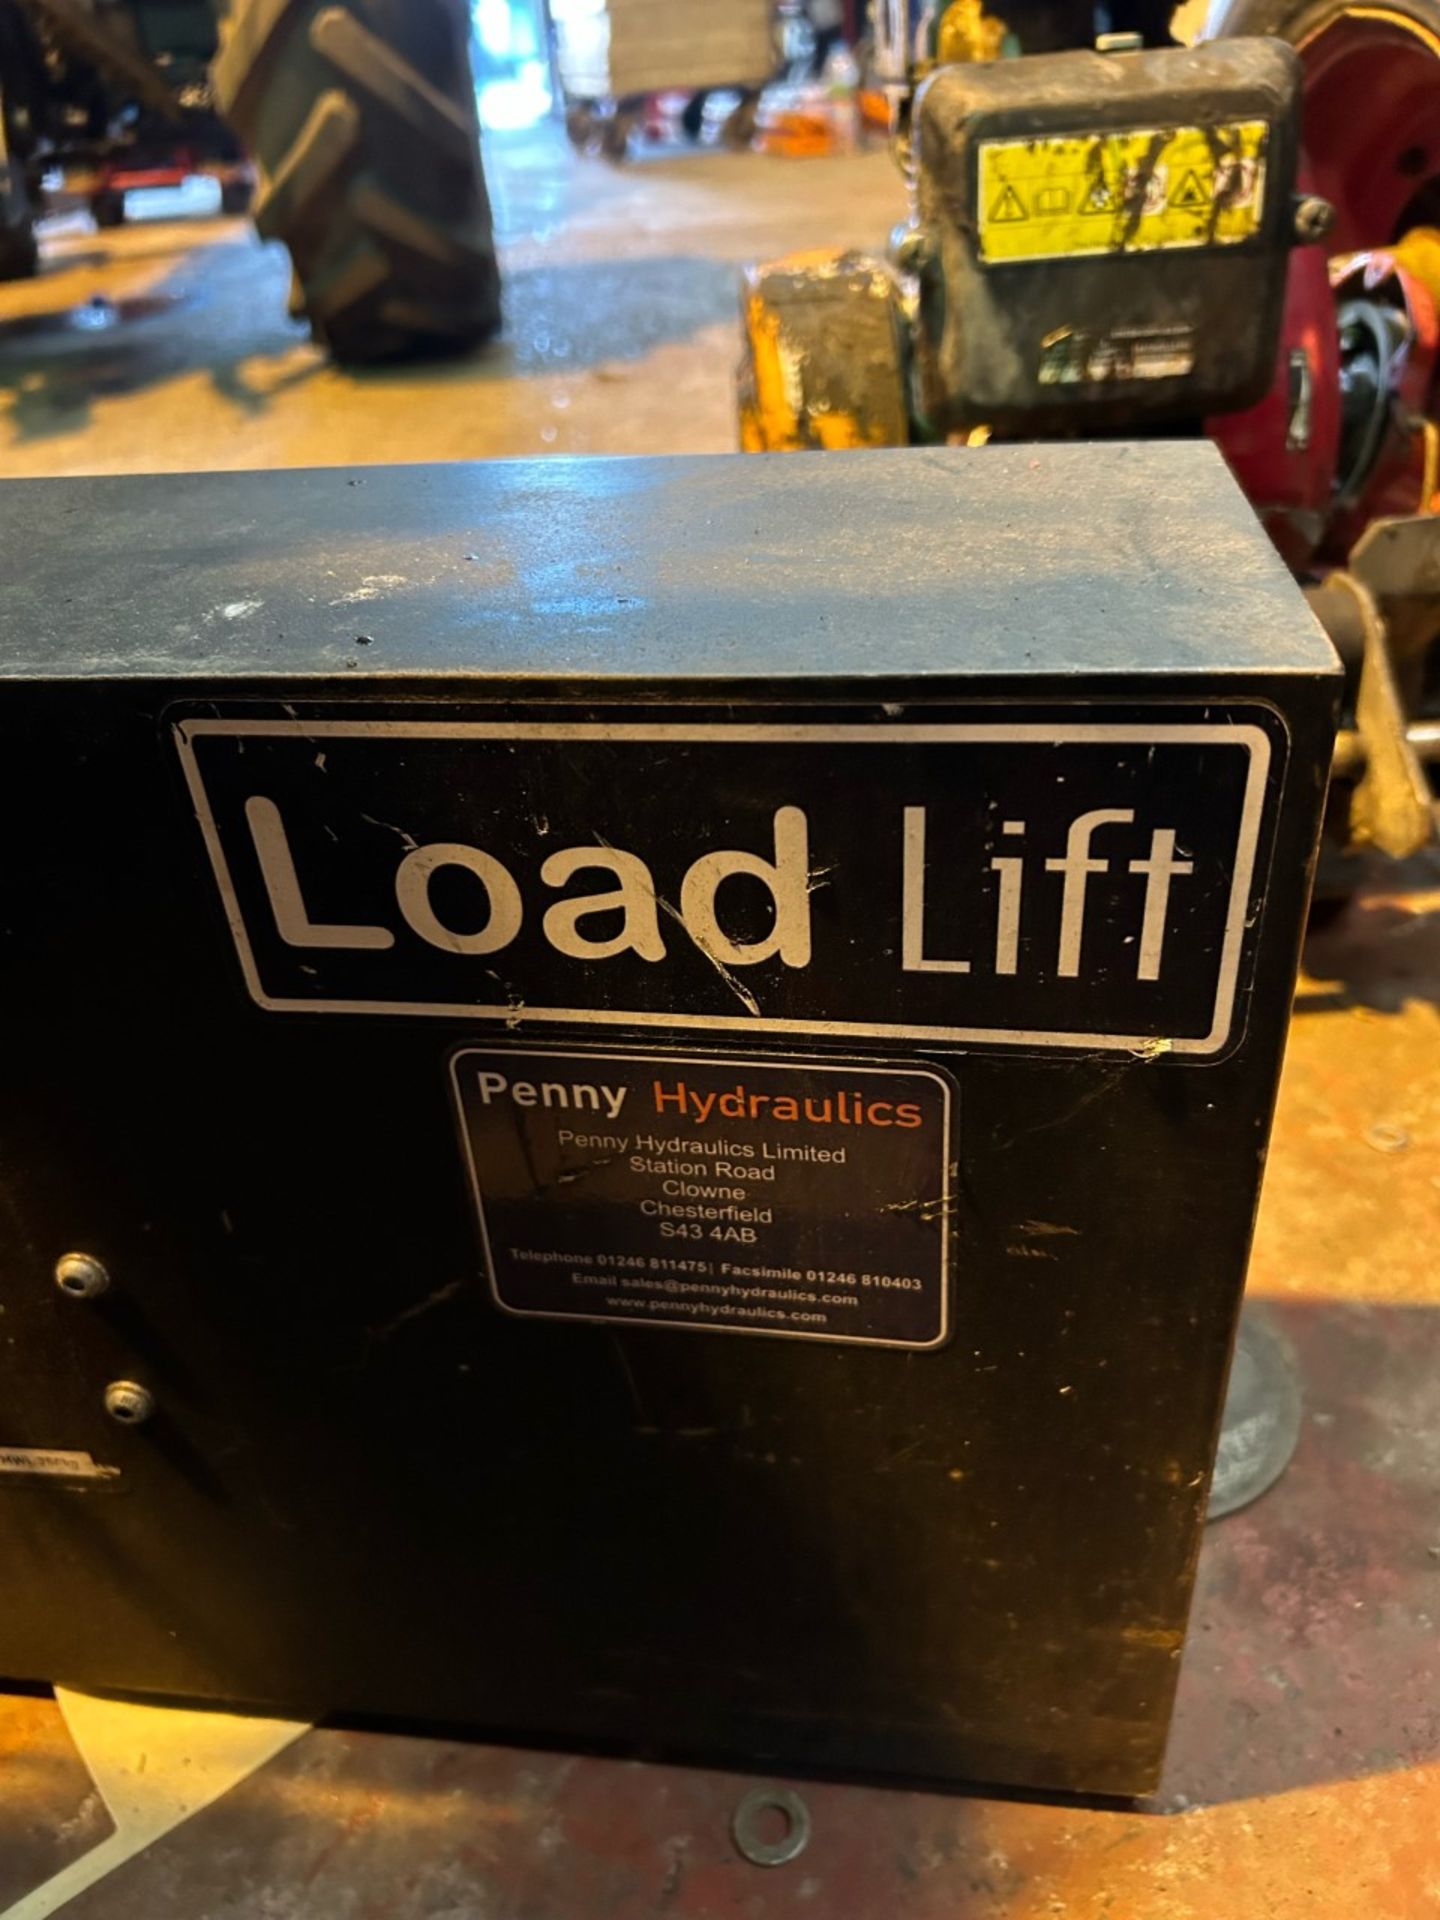 Penny hydraulics load lift for van. Good piece of kit max load lift 250kg comes with control lead. - Image 5 of 5